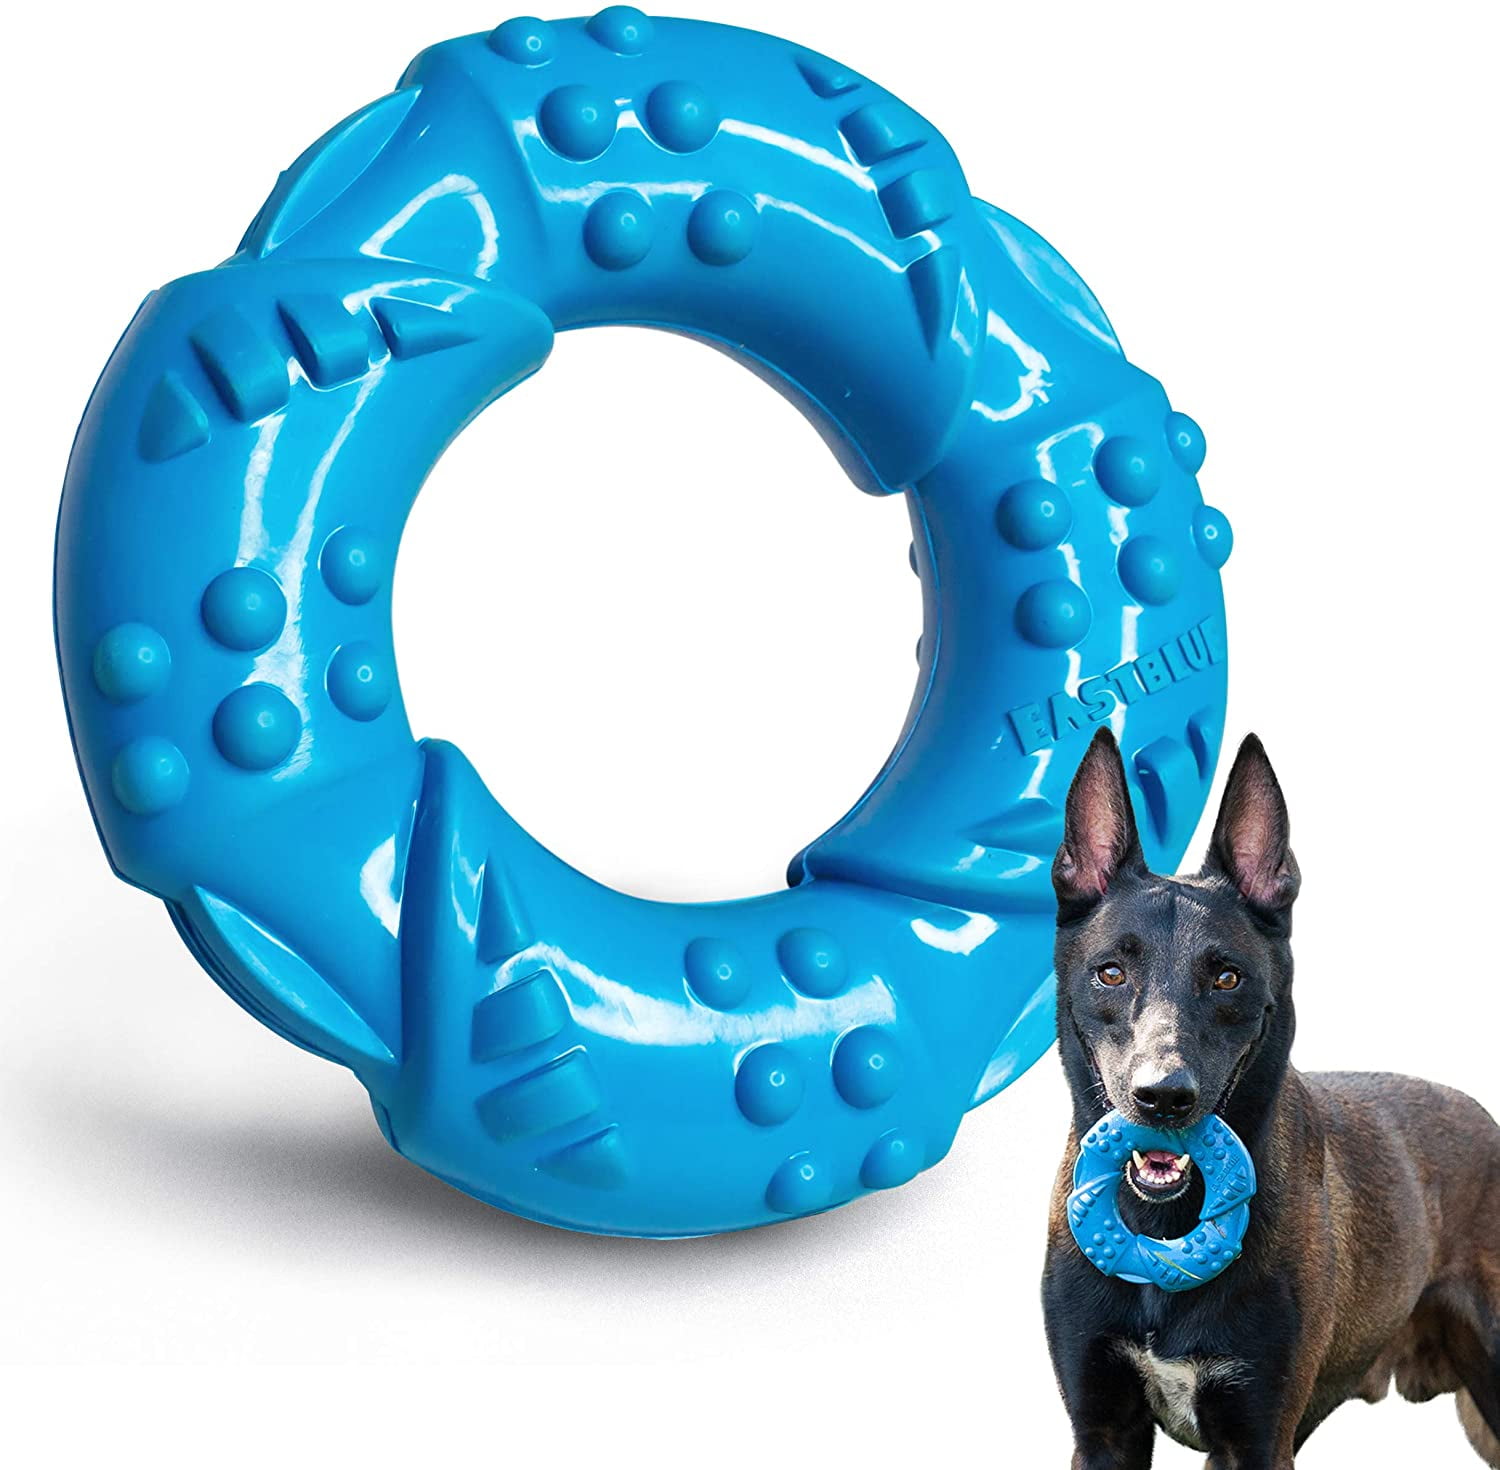 9 of the Best Stress Toys For Dogs · The Wildest